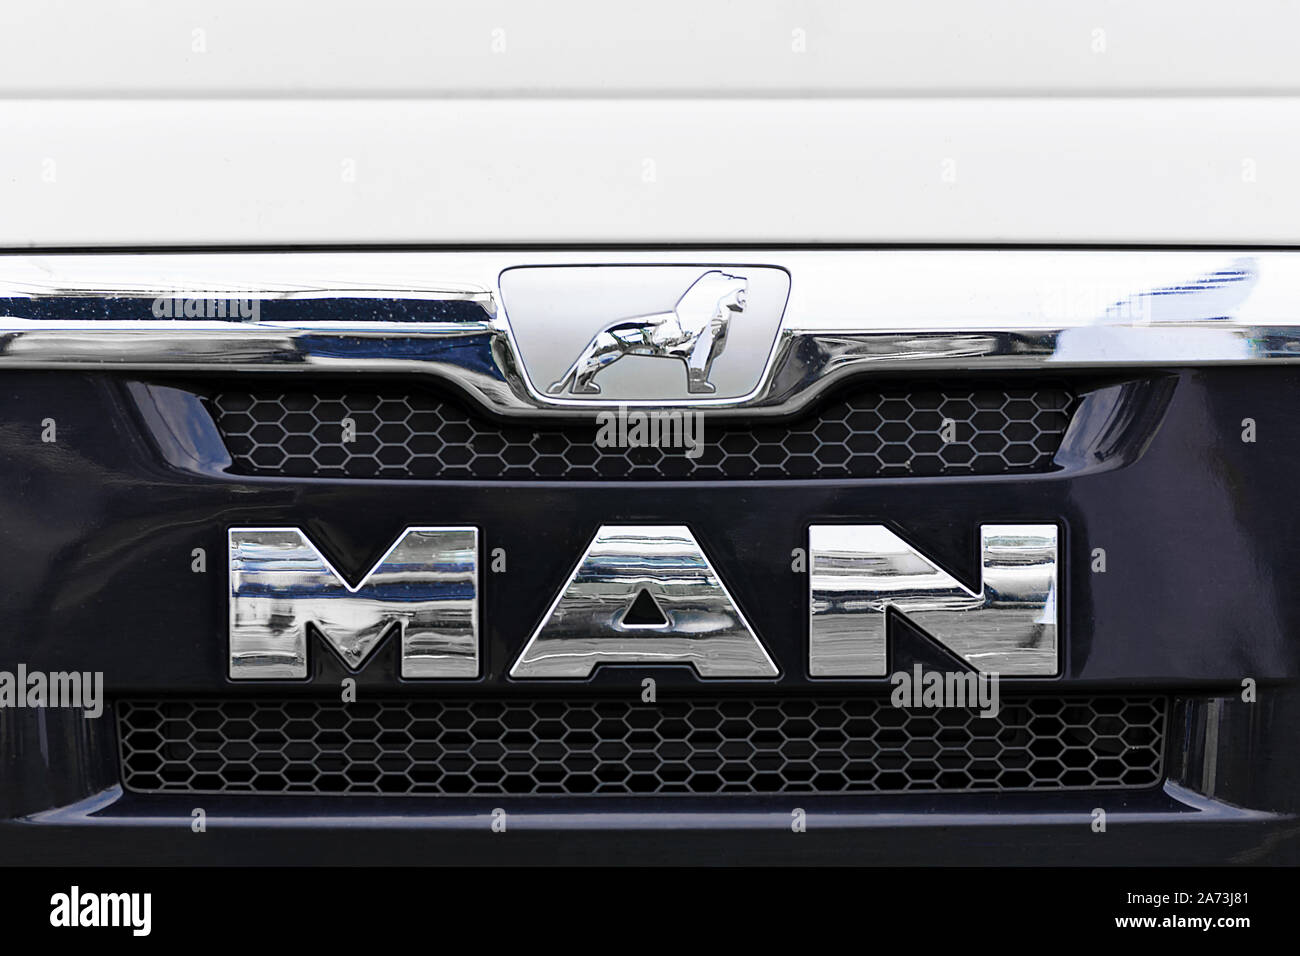 Nowy Sacz, Poland, September 07, 2019: MAN sign on a truck grilll. Man Group is a famous German mechanical engineering company. Stock Photo